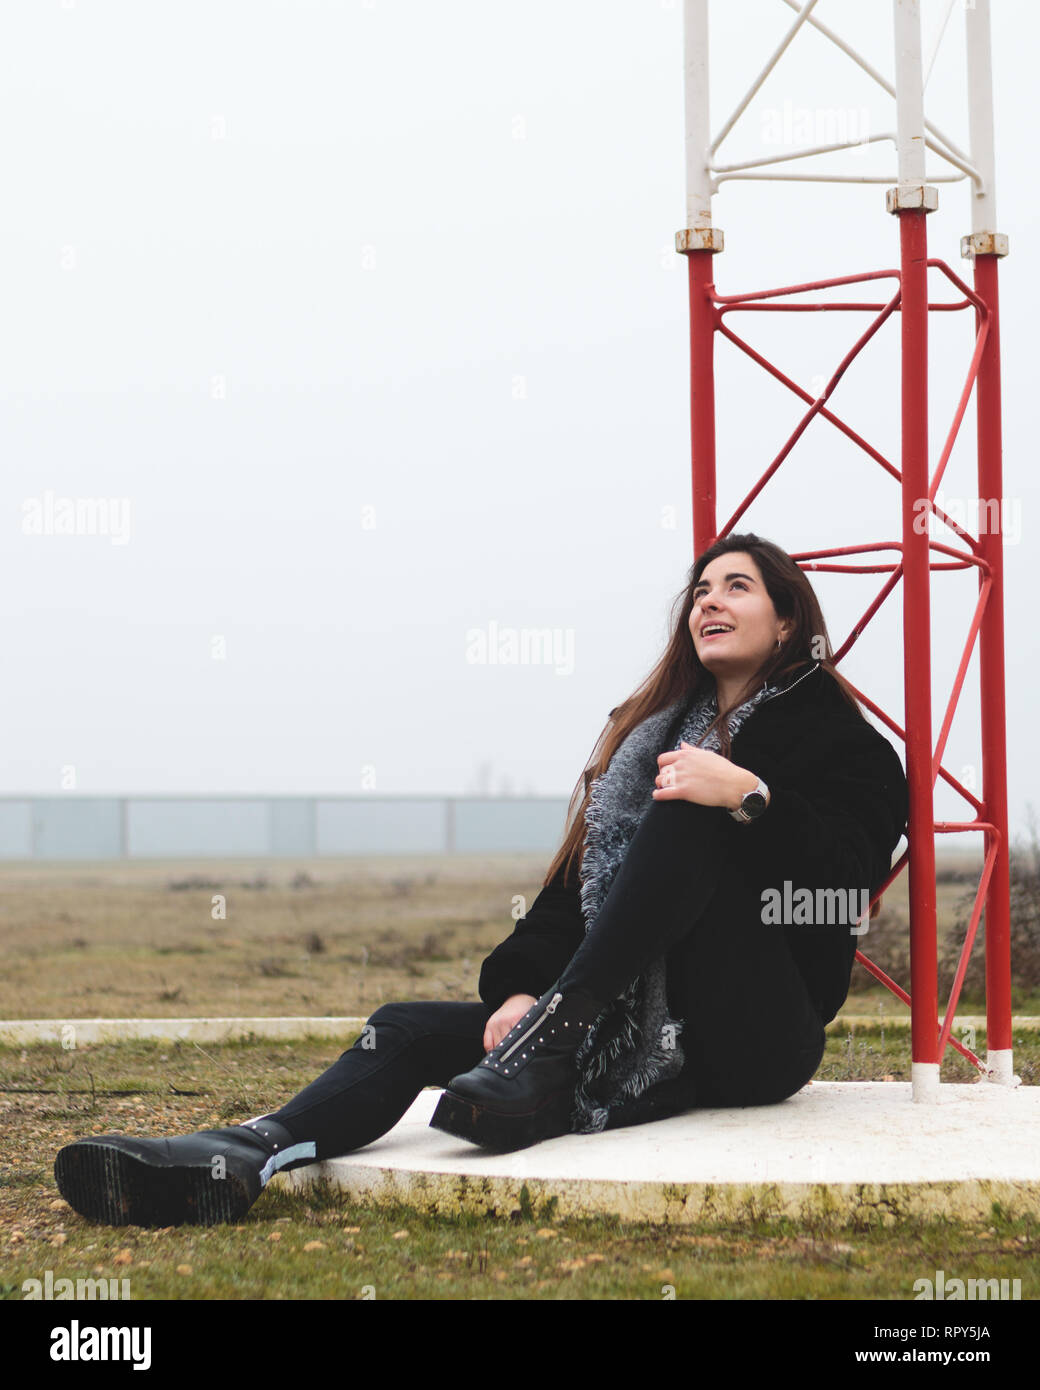 Young beautiful woman sitting on the floor in an small airport looking up in a small airport in a rural landscape. Attractive woman laughing and smili Stock Photo